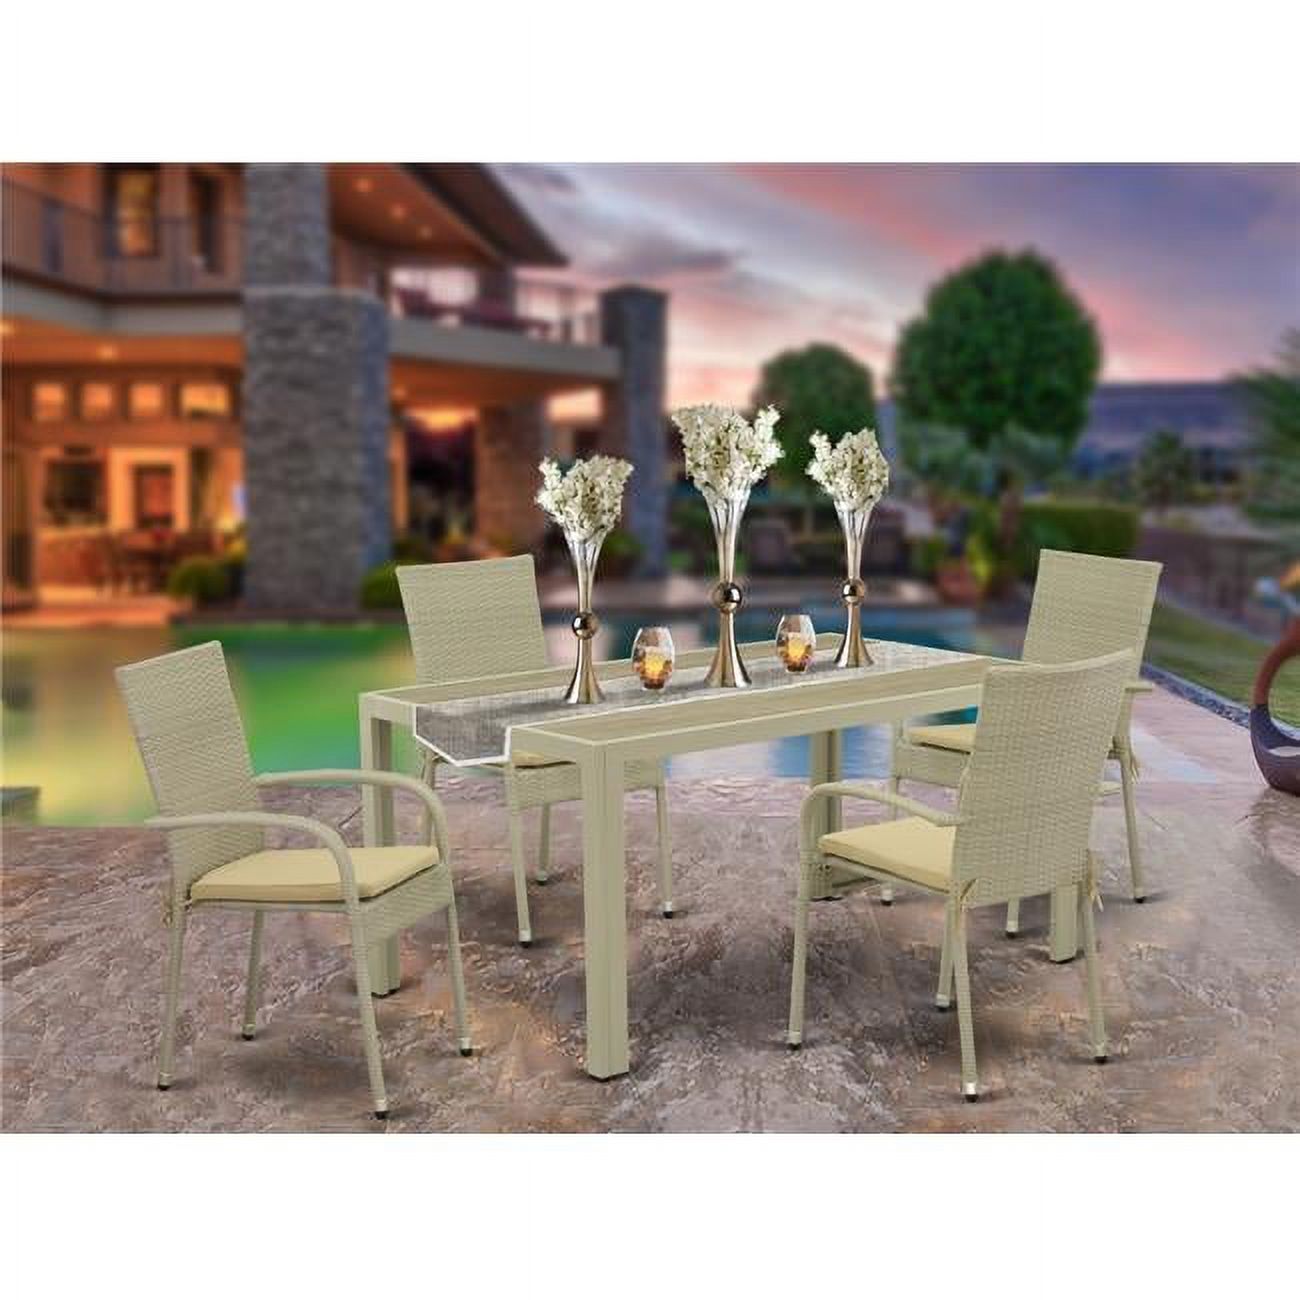 East West Furniture Jubi 5-piece Metal Patio Dining Set with Cushion in Natural - image 1 of 4